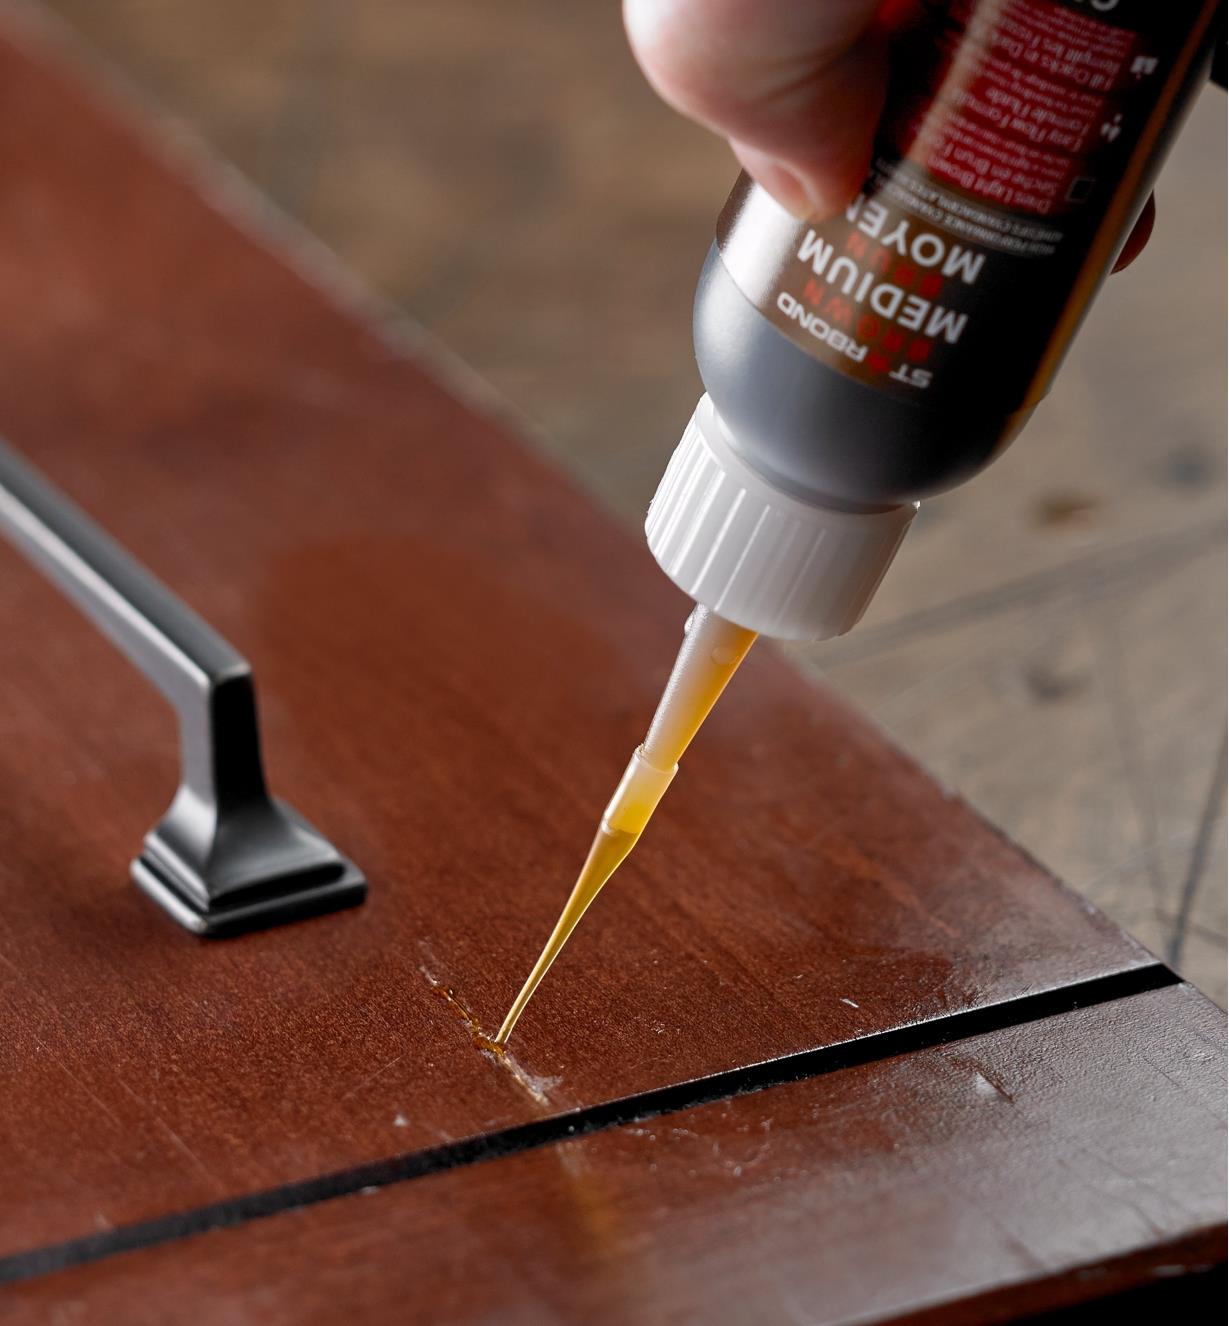 Applying Starbond brown CA glue to a crack in a wood surface